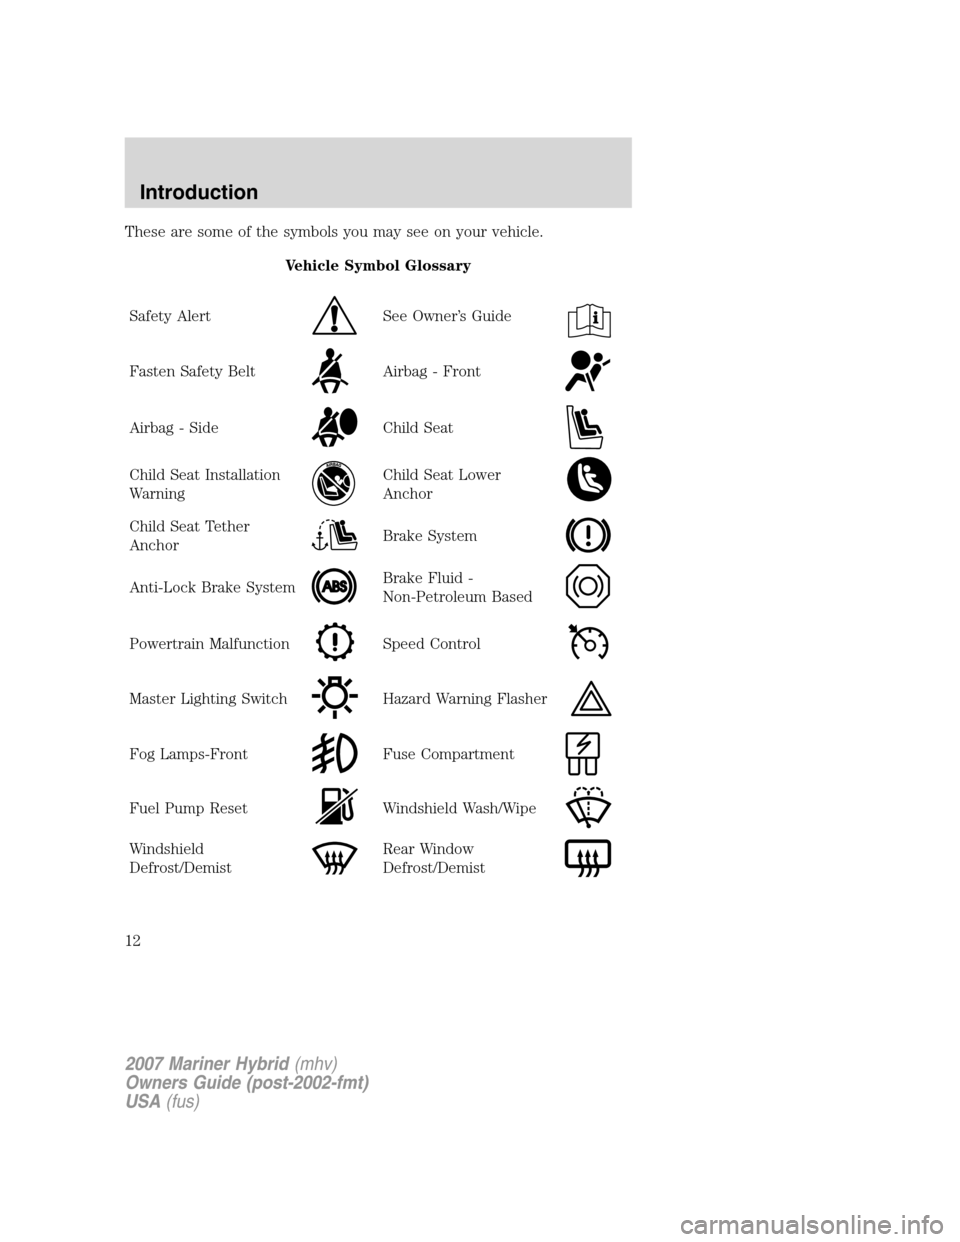 Mercury Mariner Hybrid 2007  Owners Manuals These are some of the symbols you may see on your vehicle.
Vehicle Symbol Glossary
Safety Alert
See Owner’s Guide
Fasten Safety BeltAirbag - Front
Airbag - SideChild Seat
Child Seat Installation
War